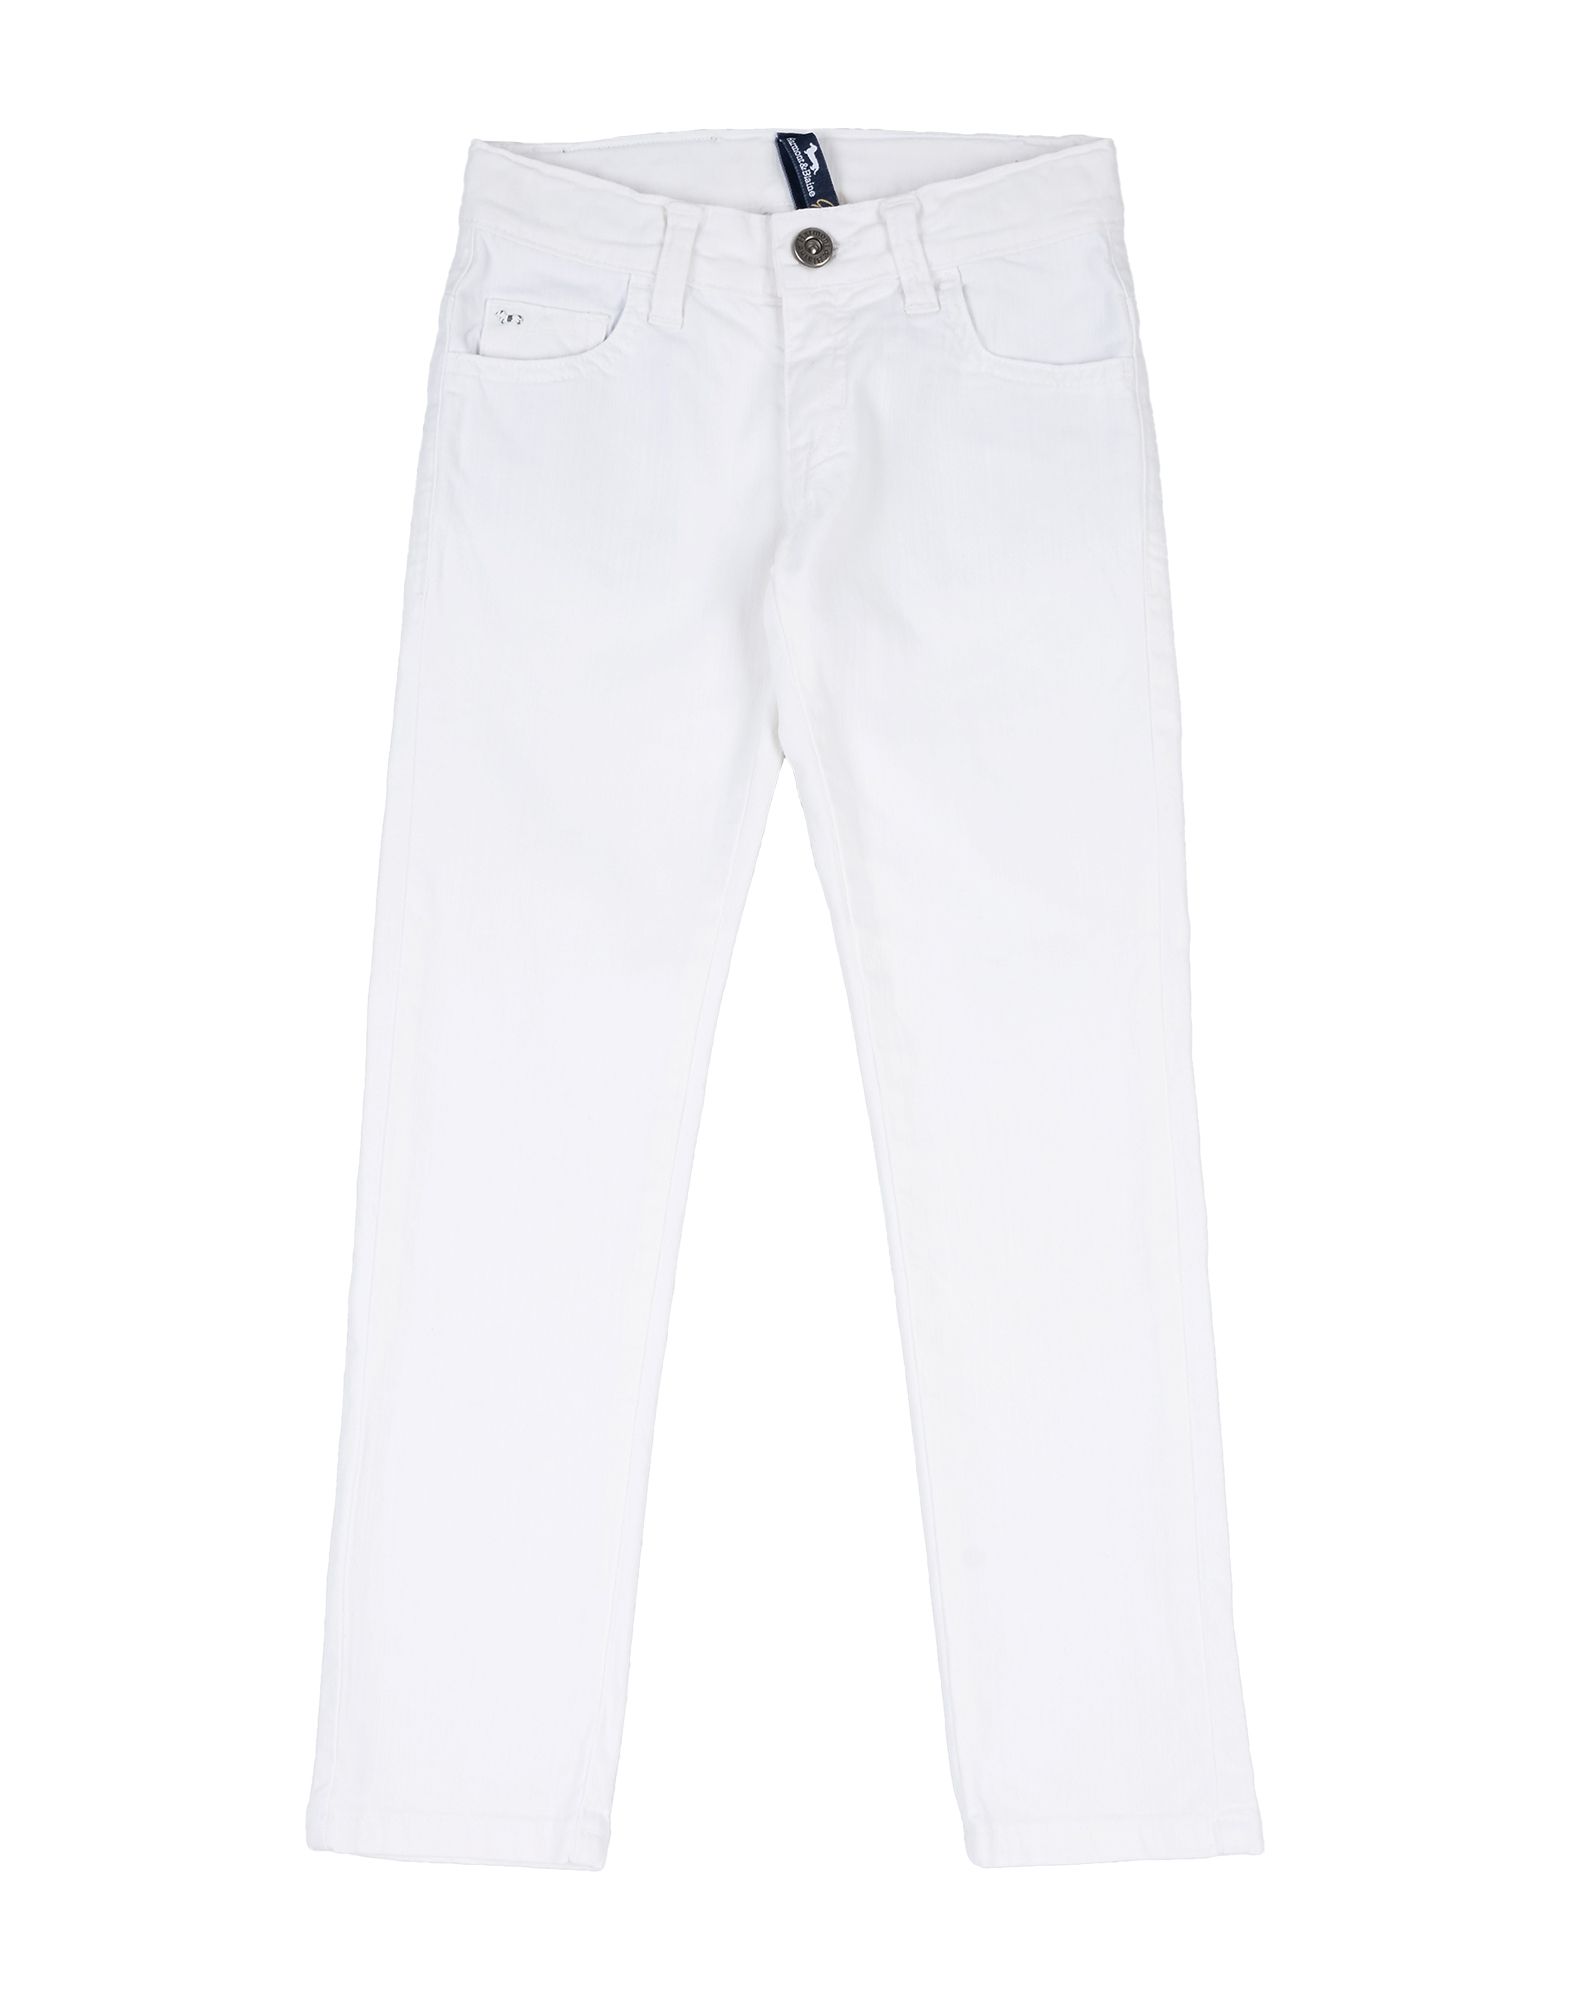 Harmont & Blaine Kids' Jeans In White